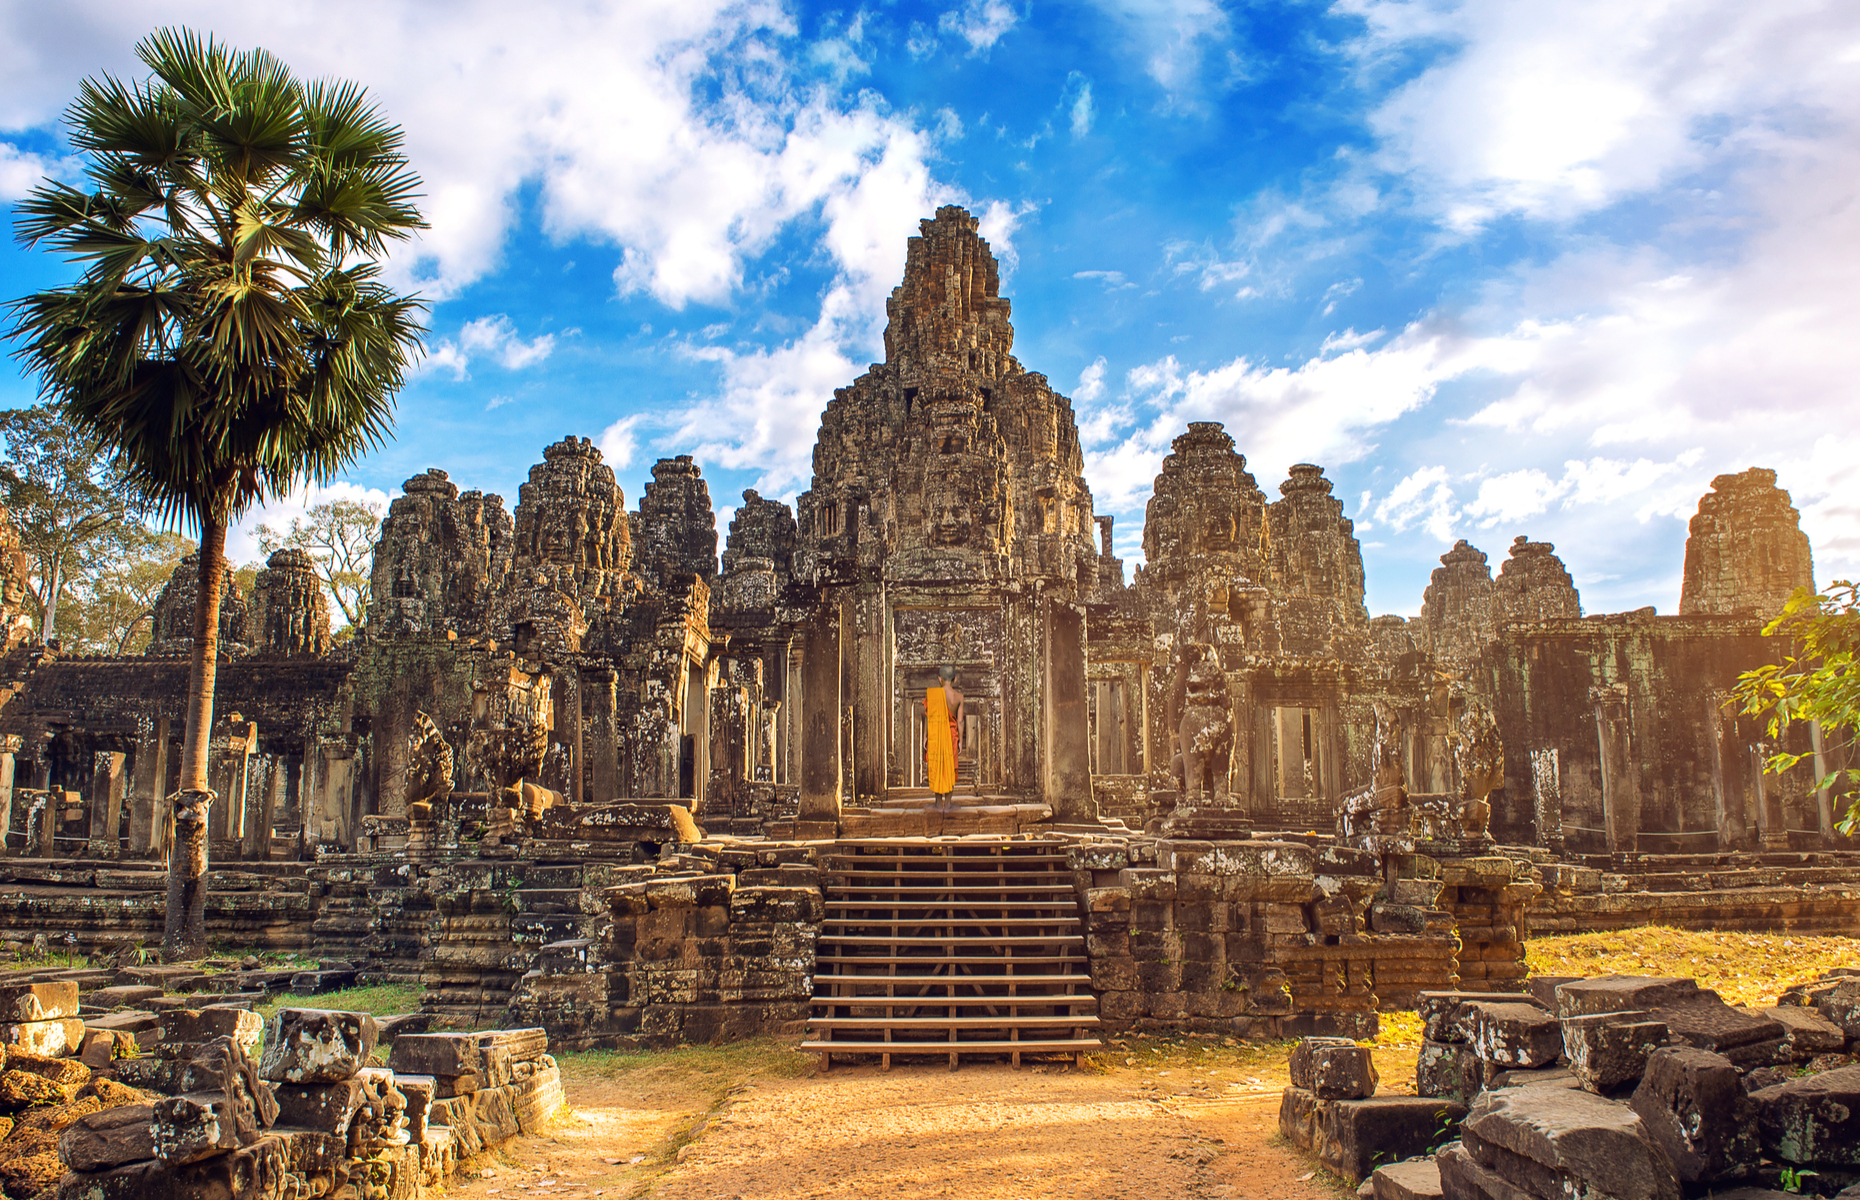 <p>In 2017, nearly <a href="https://www.phnompenhpost.com/business/ticket-revenue-angkor-wat-jumps-72-percent-after-price-hike" rel="noreferrer noopener">2.5 million visitors</a> descended on this magnificent 12th-century Khmer temple complex, a 12 per cent increase compared to the previous year. This massive influx of tourists has led to the growth of the surrounding urban area, which drains water from the soil and weakens the structure of these historic monuments. The Cambodian government stepped in, doubling the price of admission to the complex and limiting the number of visitors who can be on-site at any given time. Too little, too late?</p>